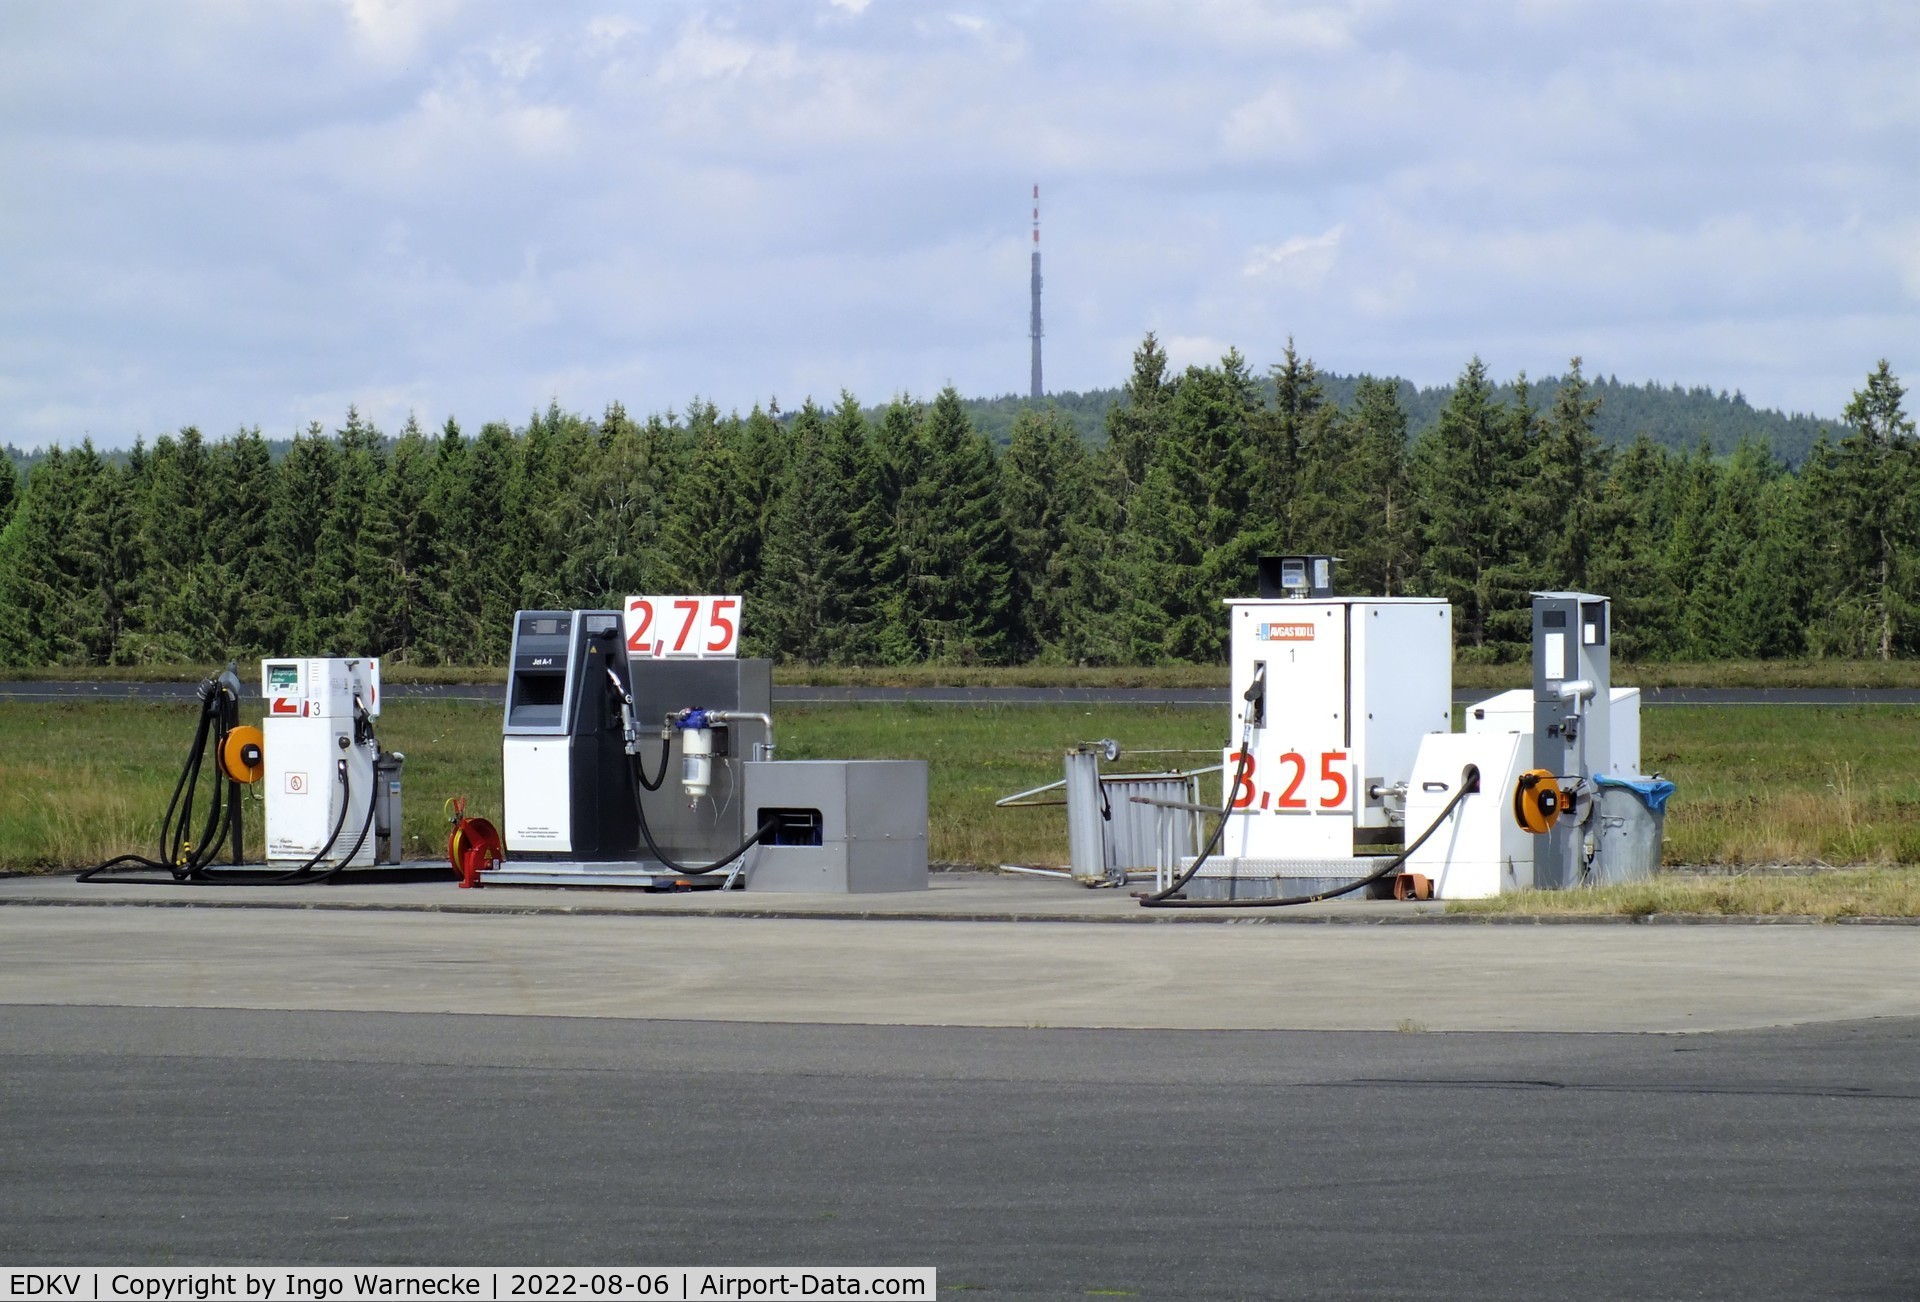 Dahlemer Binz Airport, Dahlem Germany (EDKV) - the airfield fuelling station at Dahlemer Binz airfield